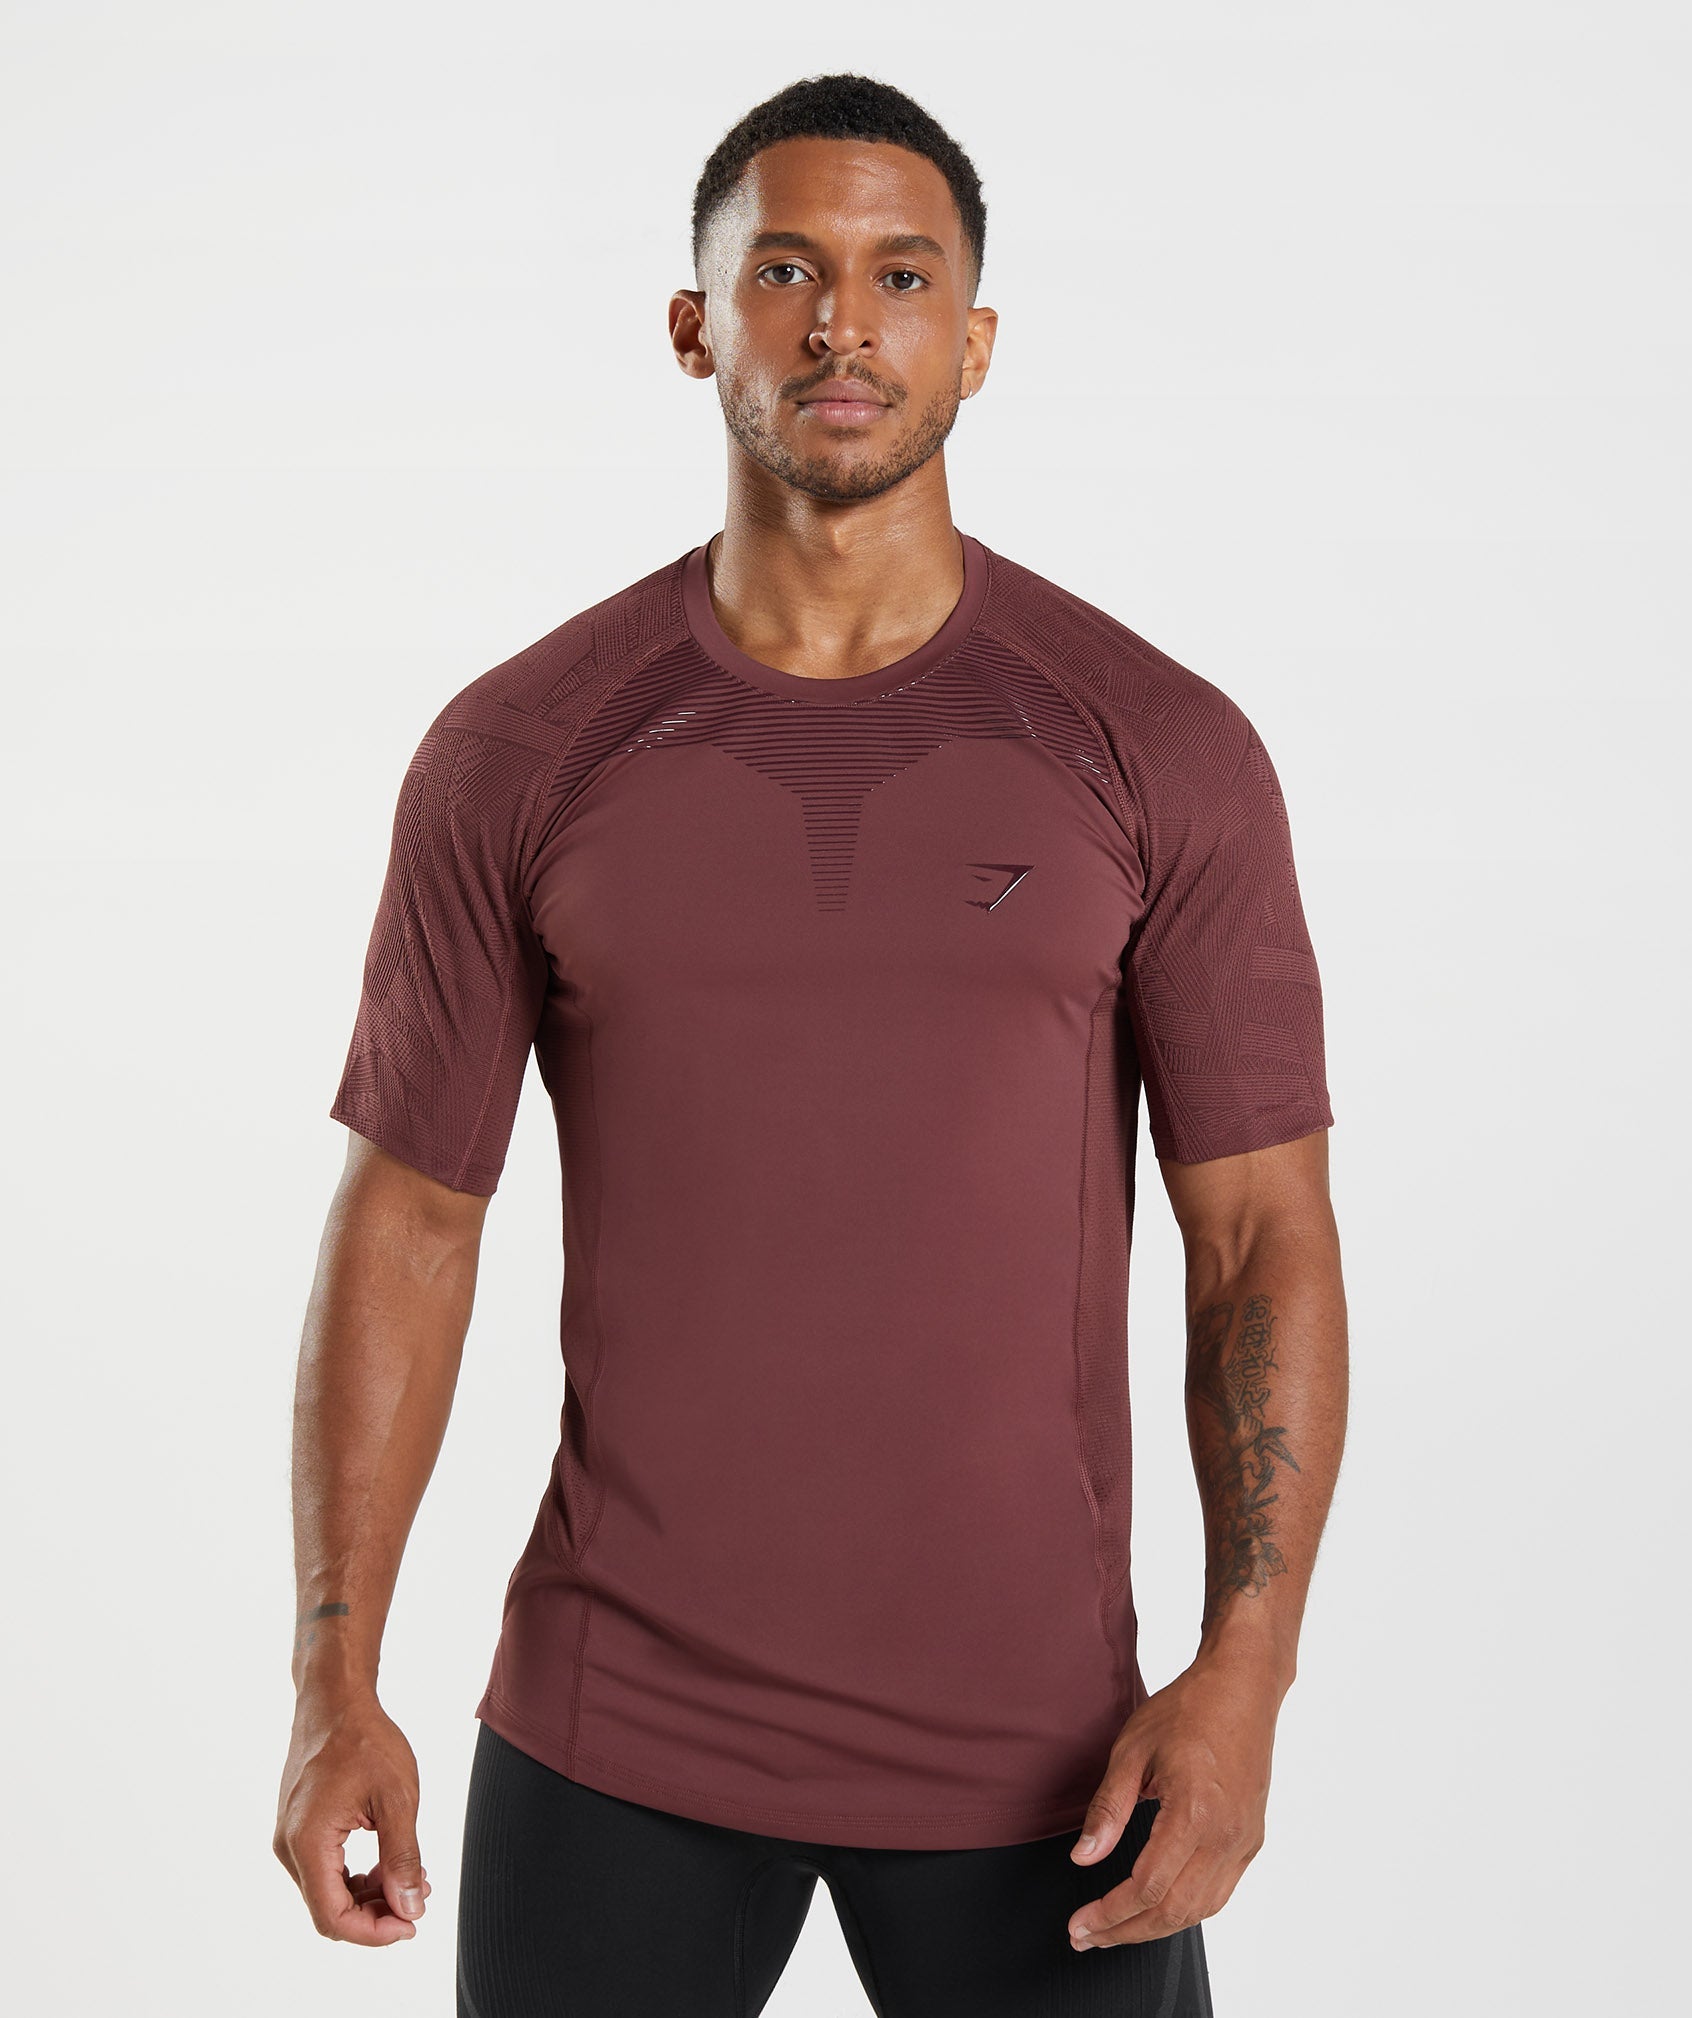 Form T-Shirt in Cherry Brown